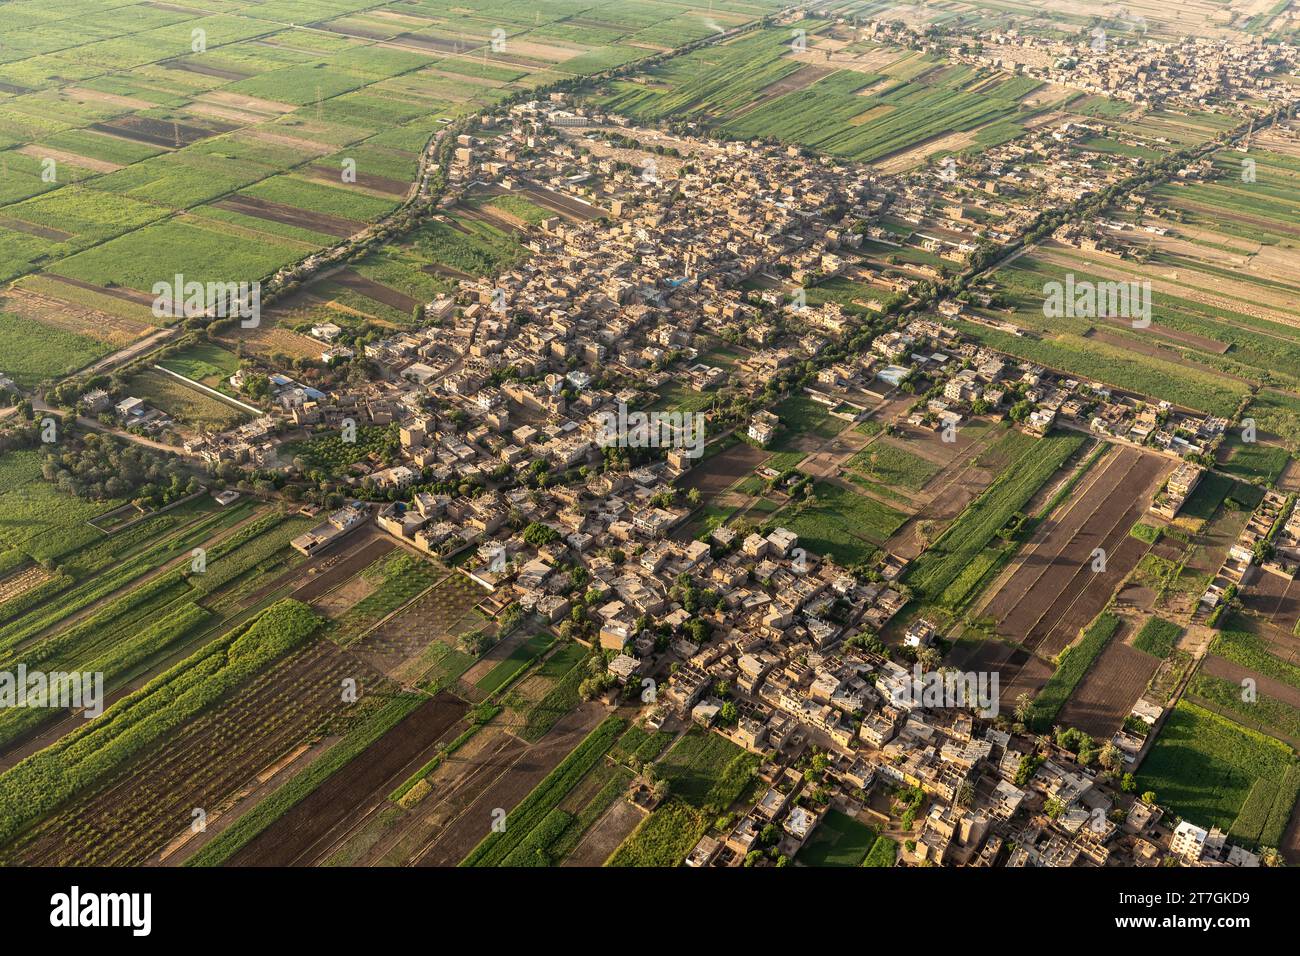 Aerial view of lush irrigated nile river valley farm field and mud brick houses Stock Photo